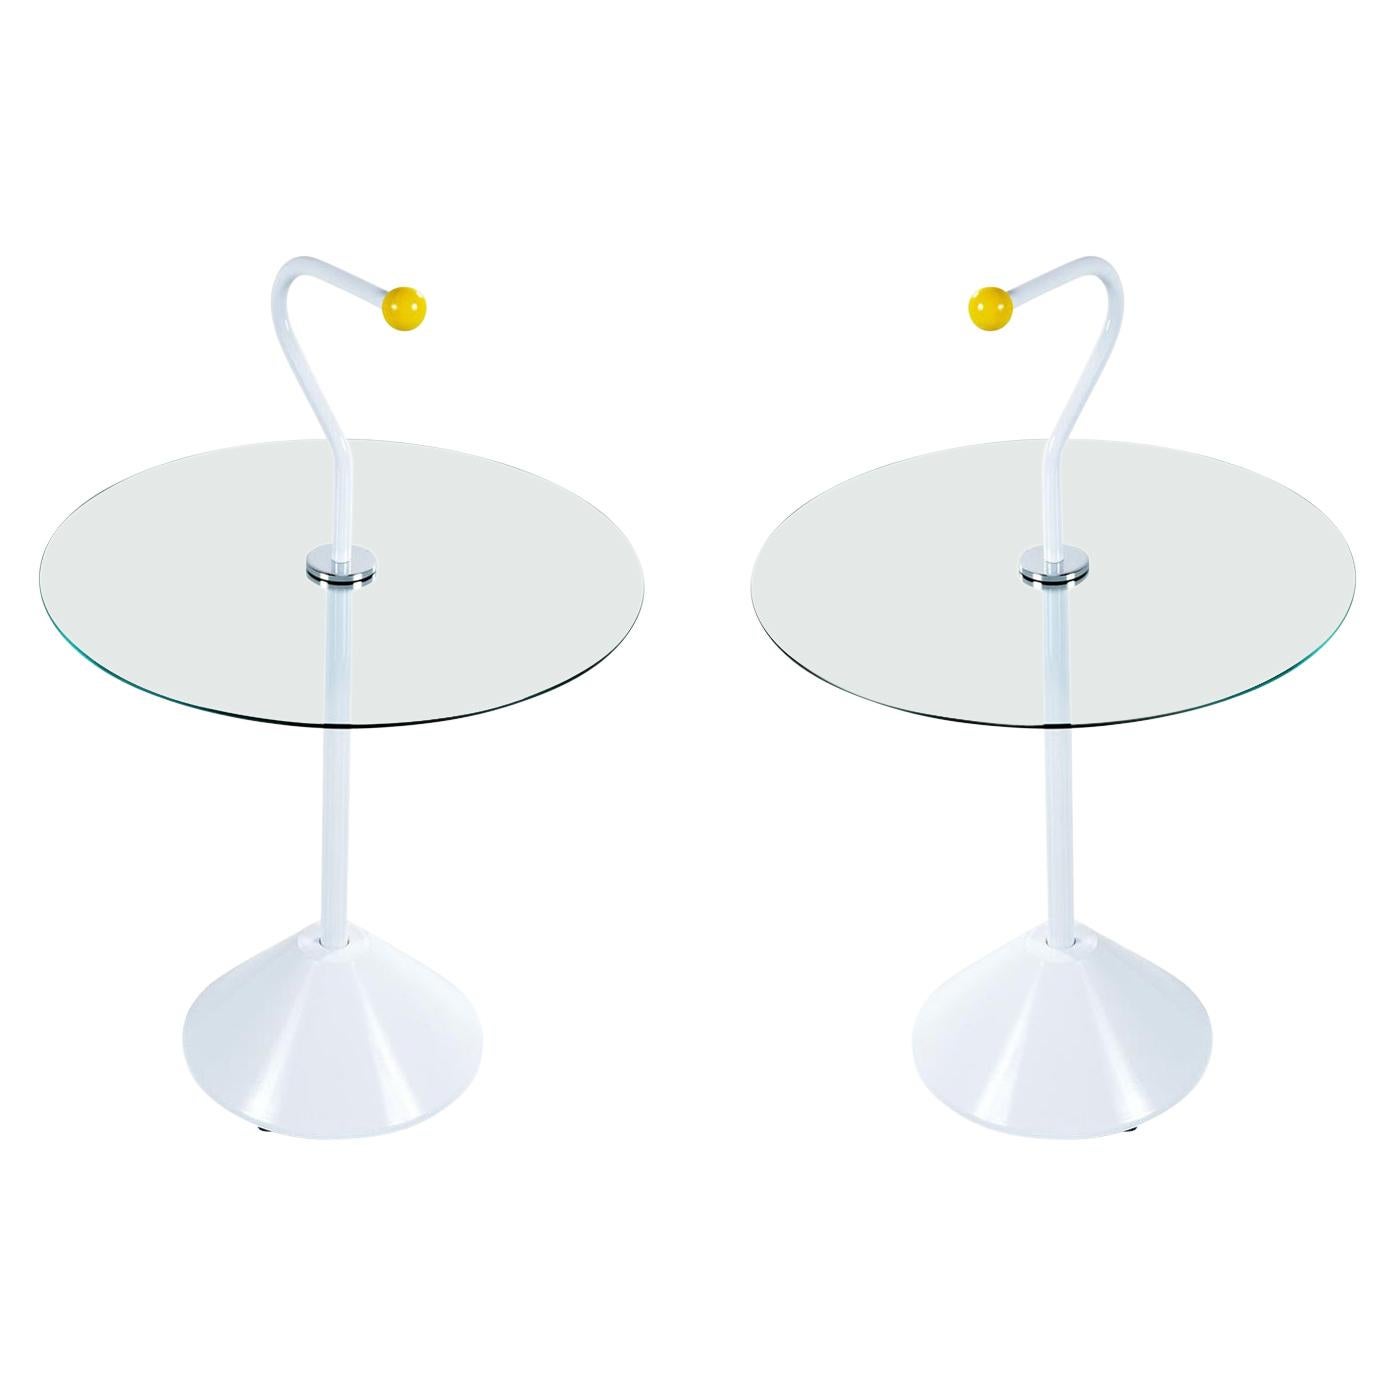 Pair of Memphis White Enamel and Glass Side Tables with Handles